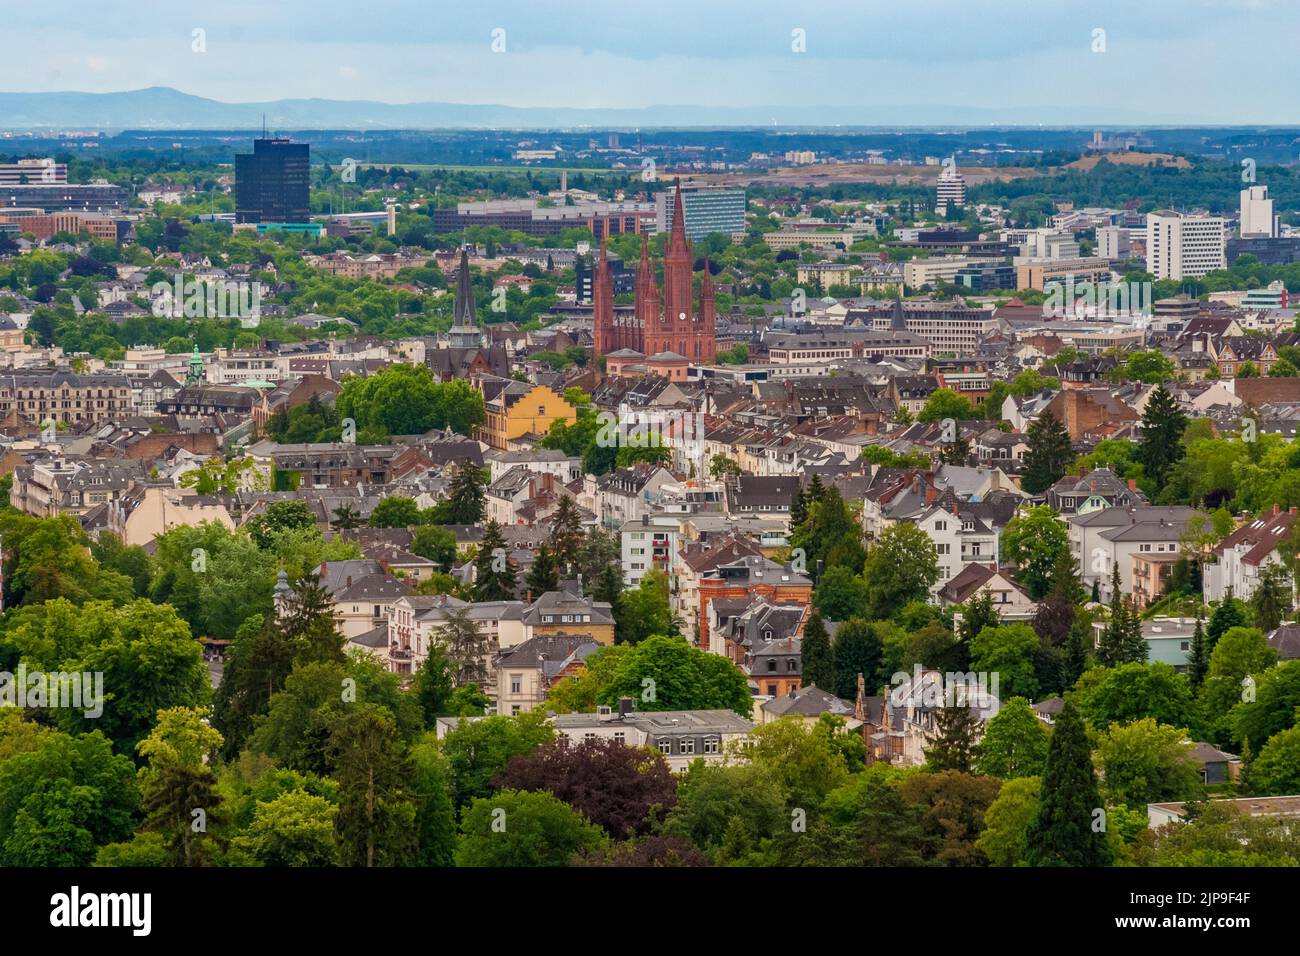 Great panoramic view of the historic Old Town of Wiesbaden, state capital of Hesse, Germany, with the famous neo-Gothic red all-brick Marktkirche... Stock Photo